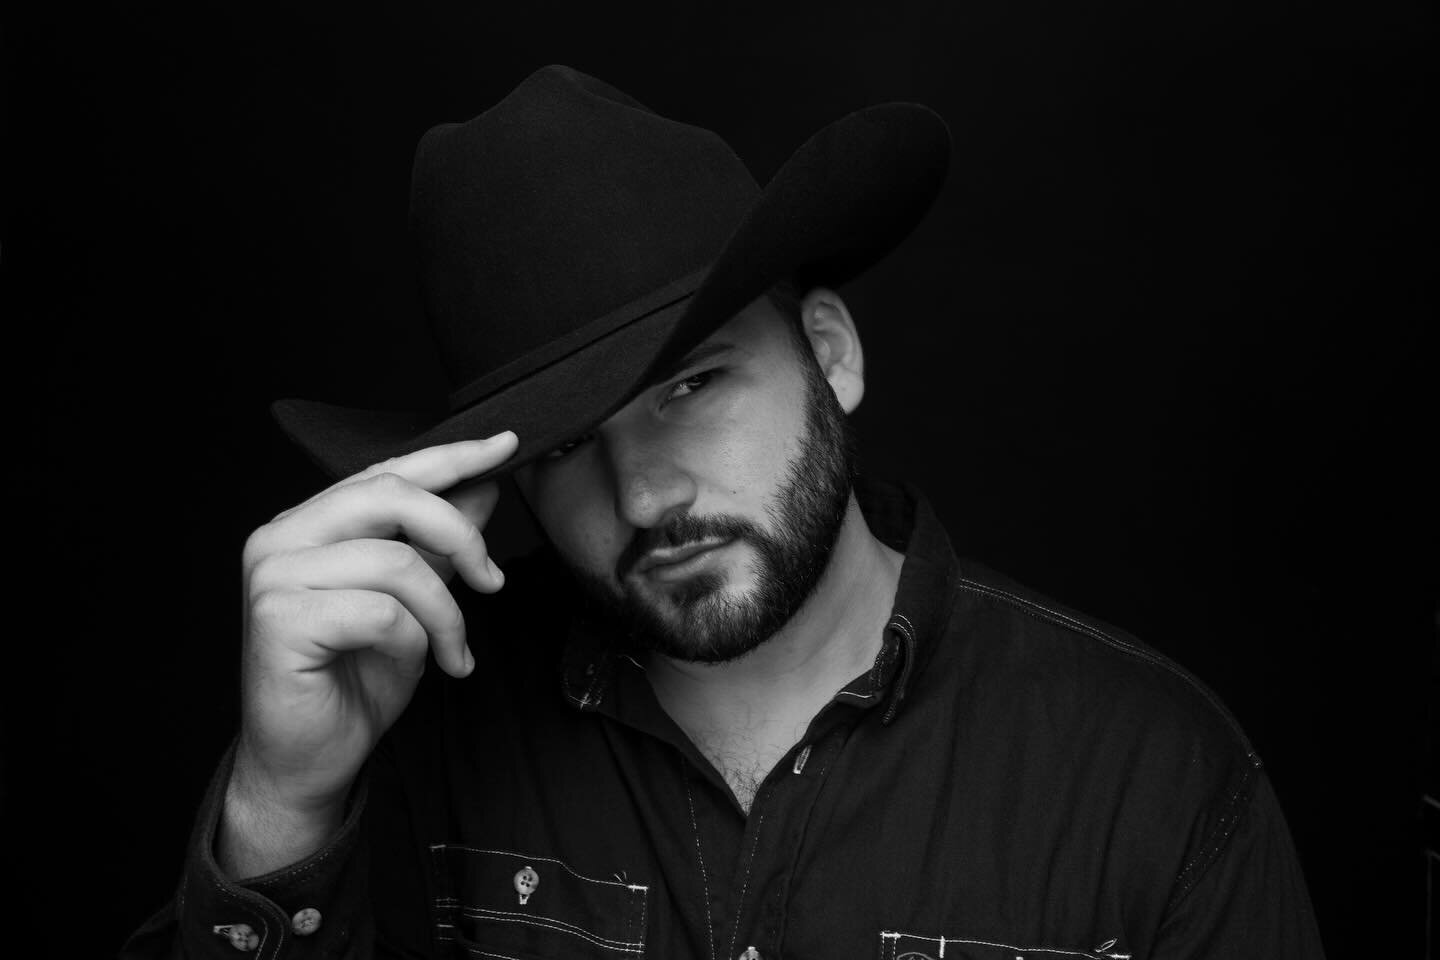 Jarrod Barry - Pittsburgh&rsquo;s Favorite Cowboy 🤠

With a shift in genres, Jarrod went from rap back to his home roots of country. This shift has blessed him with performances all over Pittsburgh, Nashville, and even Toronto! 

Naturally, we had t